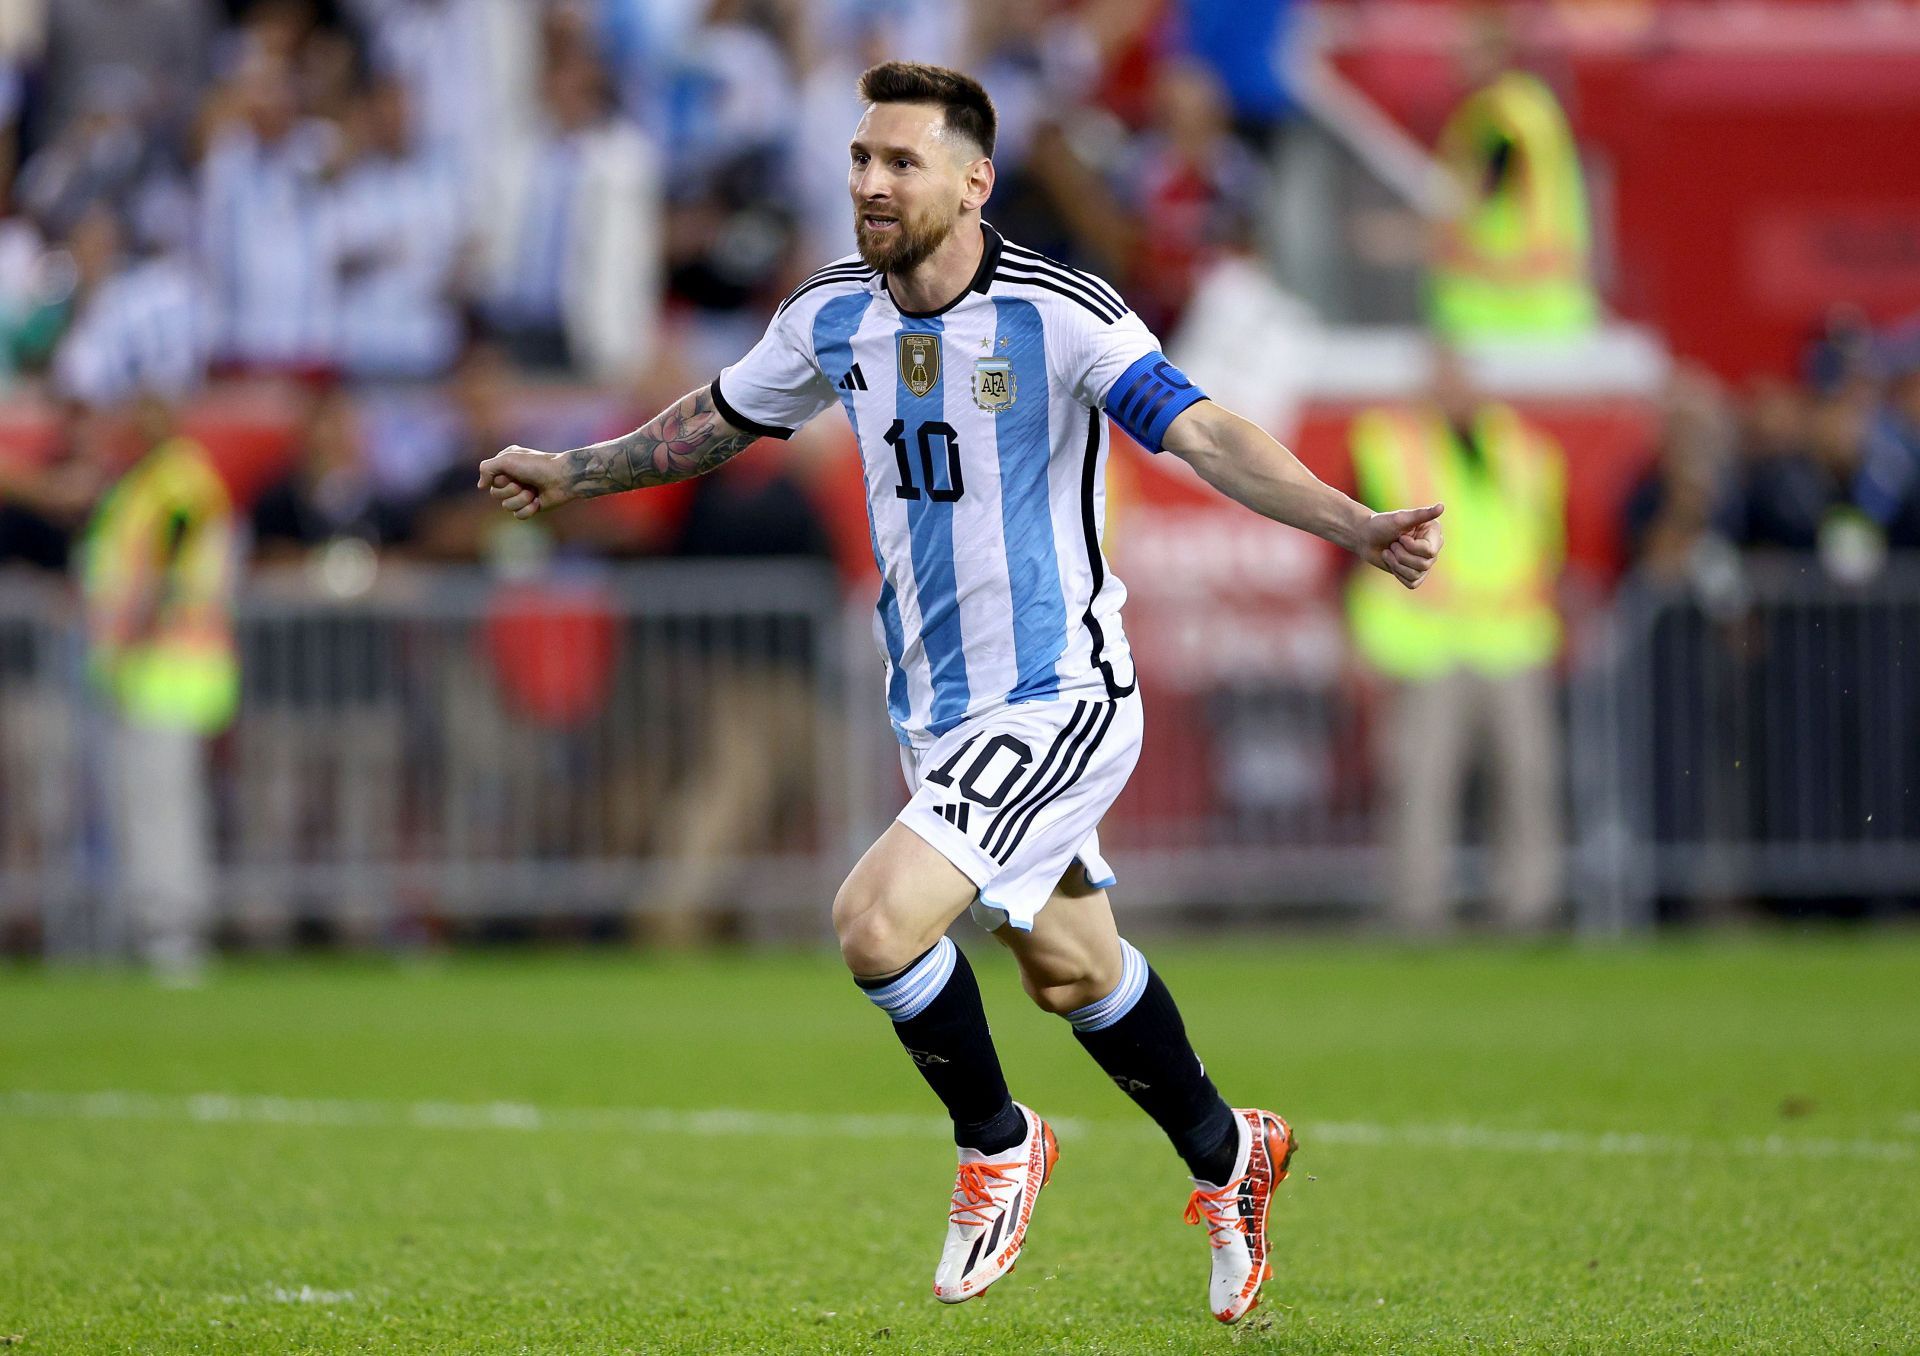 Lionel Messi future is subject to speculation